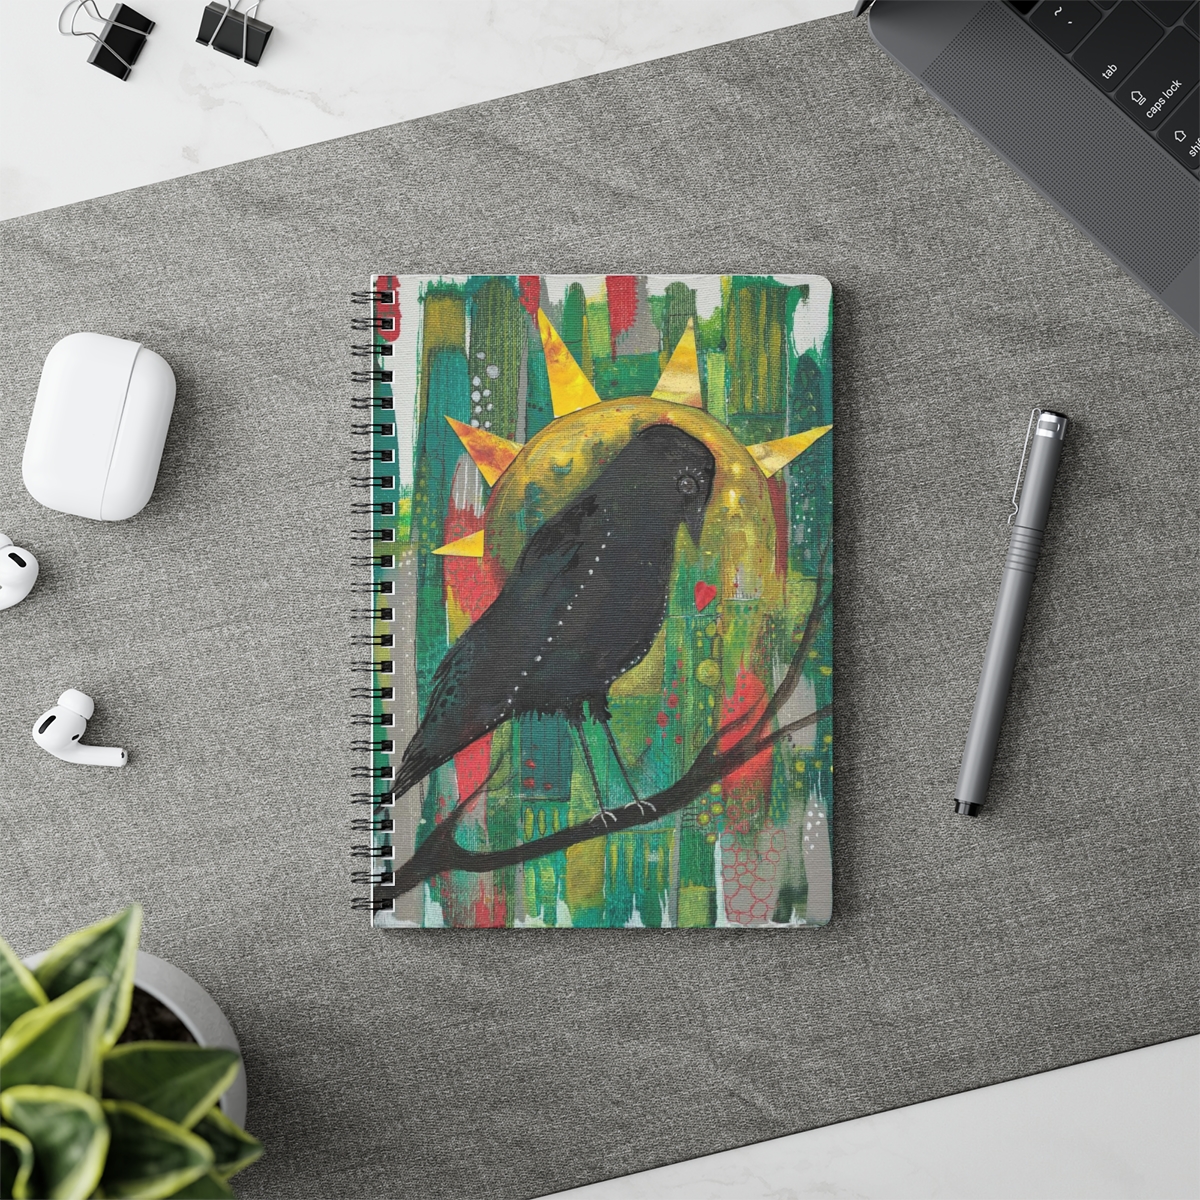 Special crow notebook in context. Black crow sits on a branch surveying her patchwork kingdom of reds, greens and grey. Yellow sun behind her looks like her crown.